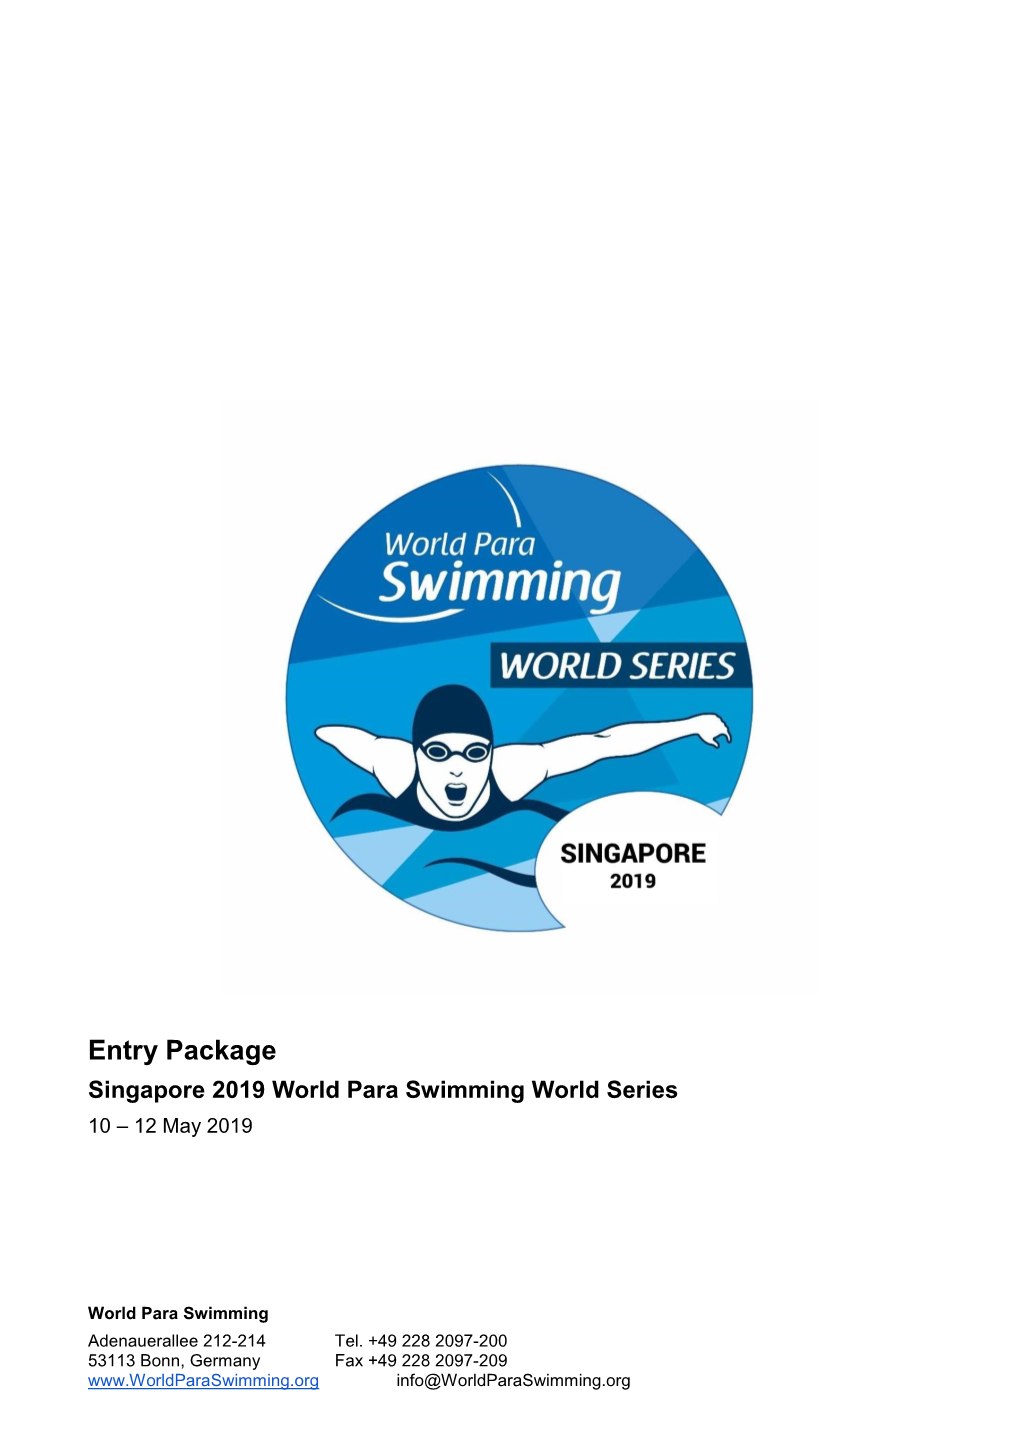 Entry Package Singapore 2019 World Para Swimming World Series 10 – 12 May 2019